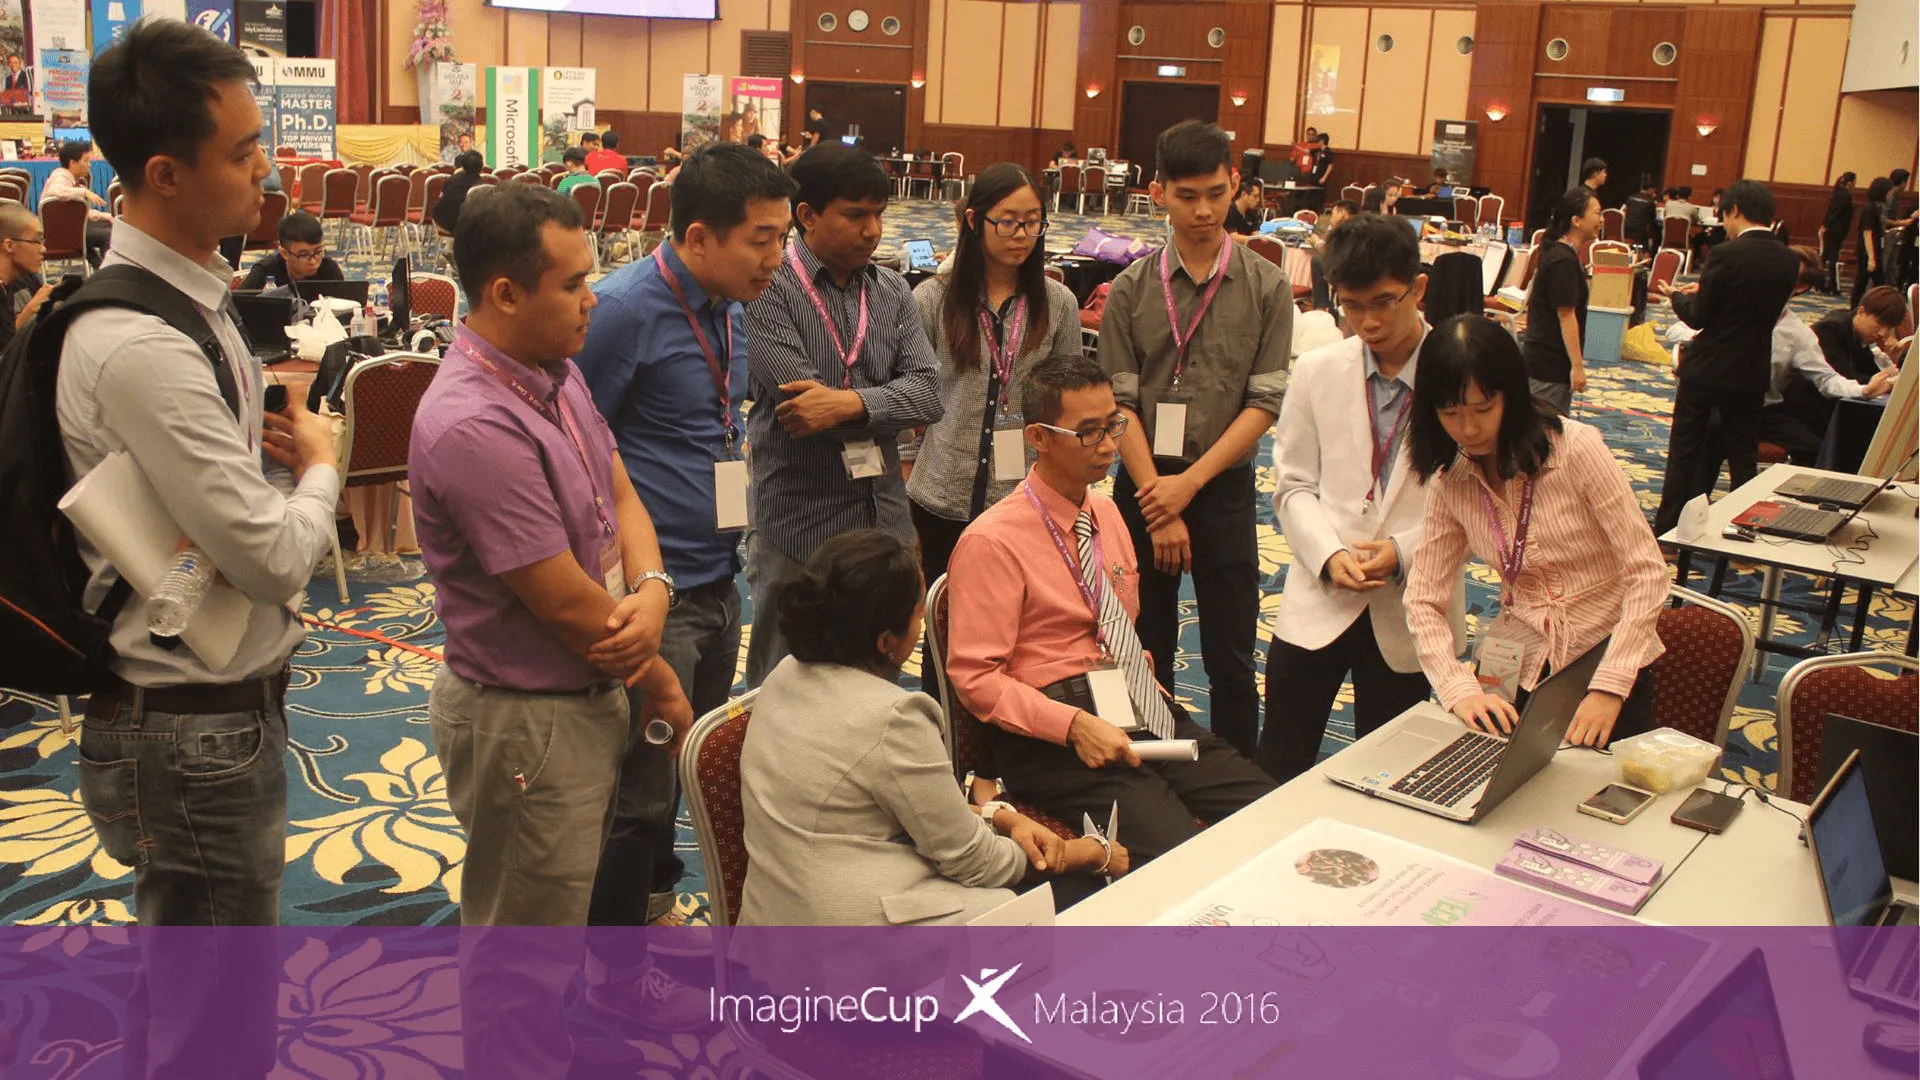 Microsoft Imagine Cup Malaysia 2016: Competitor getting grilled